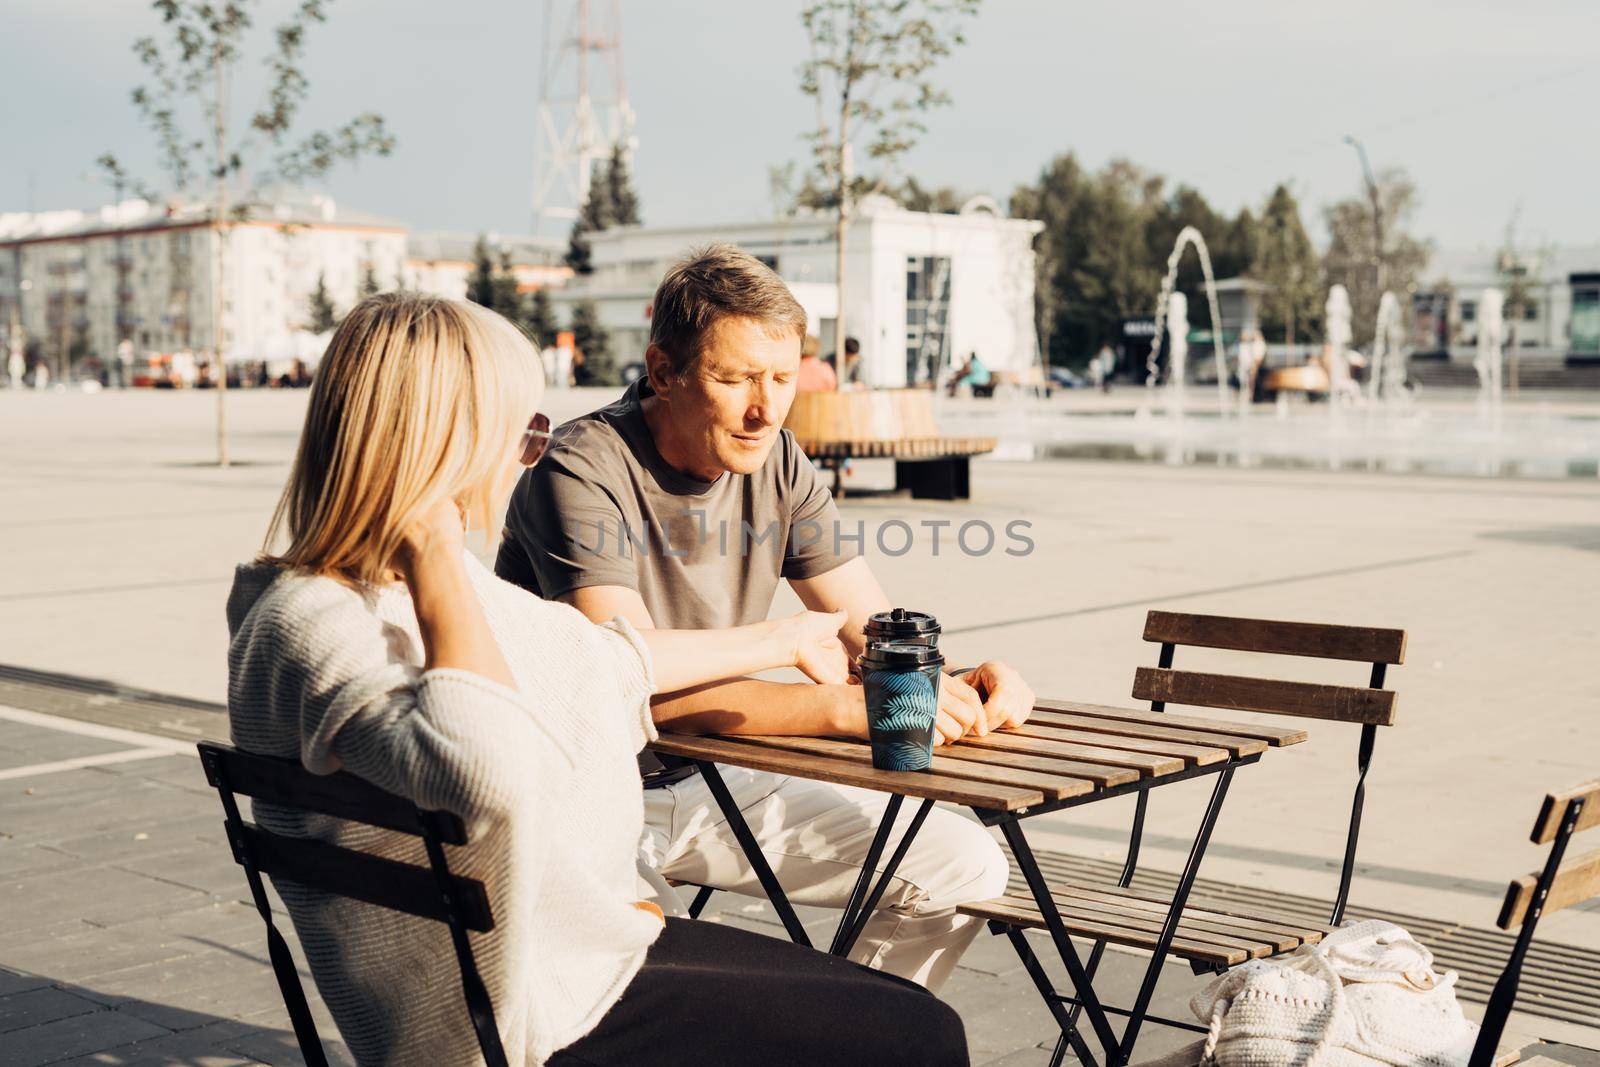 An adult mature happy couple in love in a street cafe order coffee. A blonde caucasian man and woman spend time together. Senior wife and husband walking outdoors